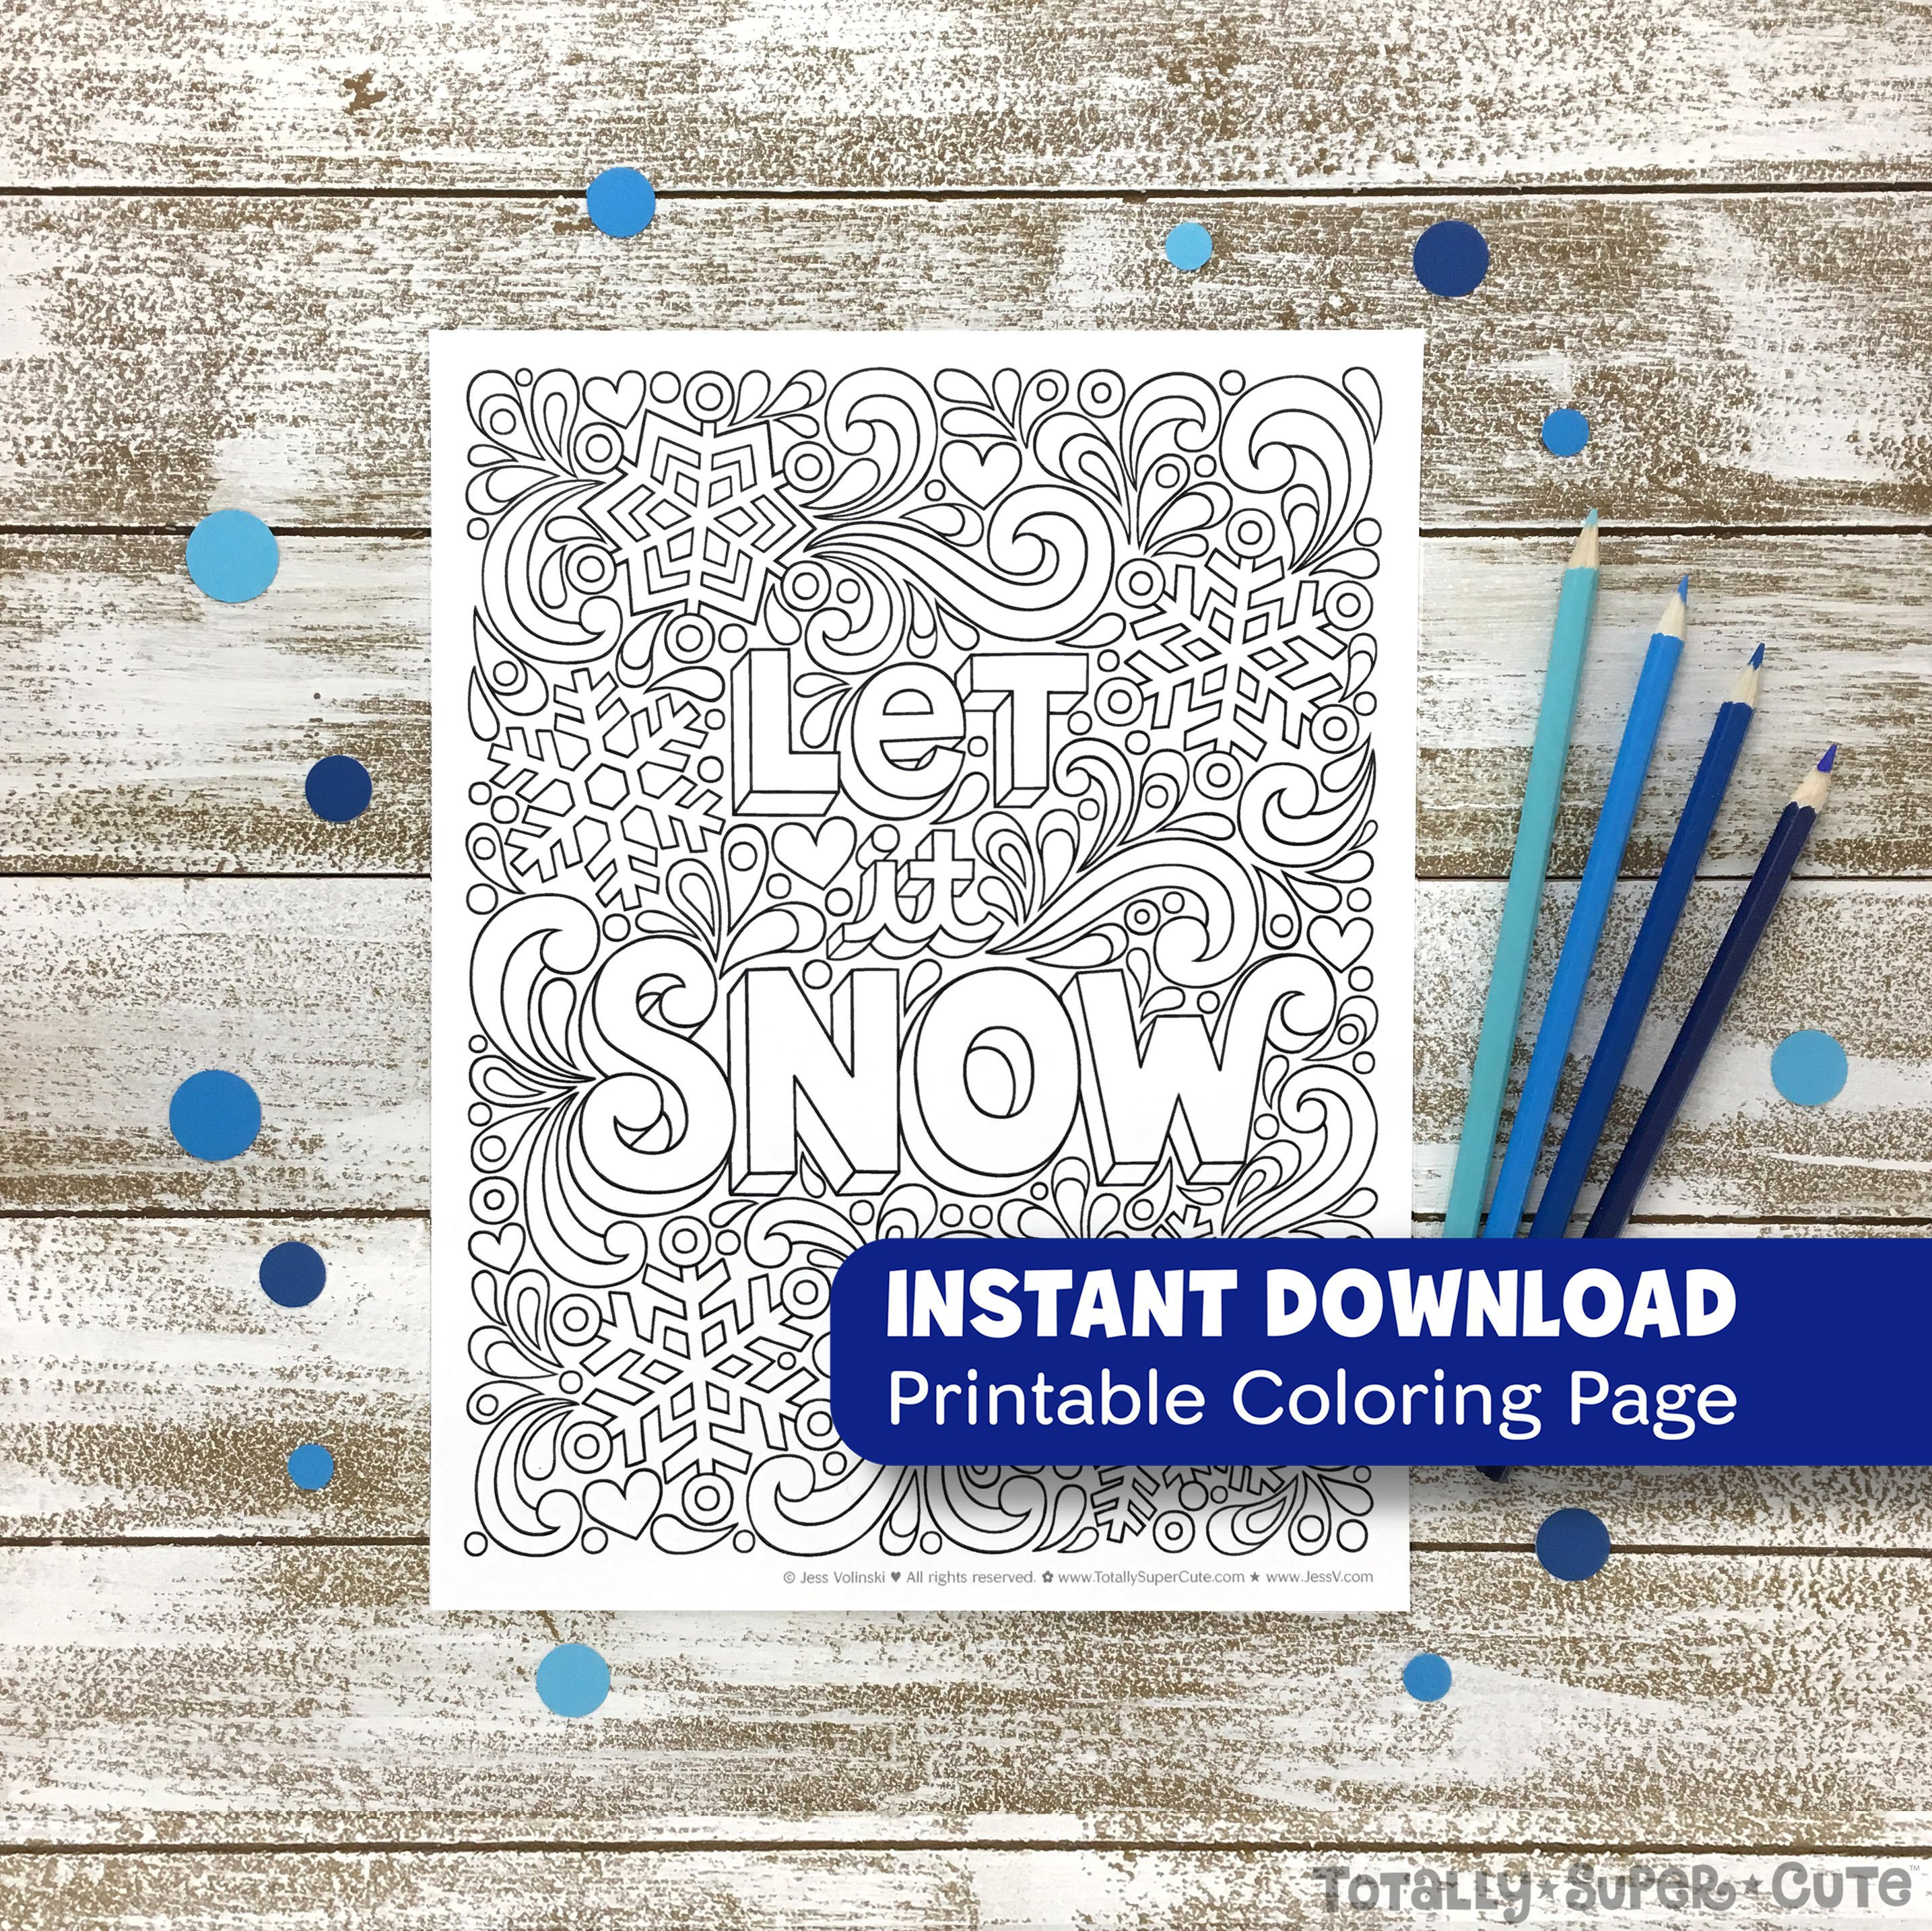 Let It Snow Coloring Pages Let It Snow Coloring Page Adult Coloring Instant Download Printable Snowflake Cold Winter Holiday Art Activity Pdf Notebook Doodles Kids